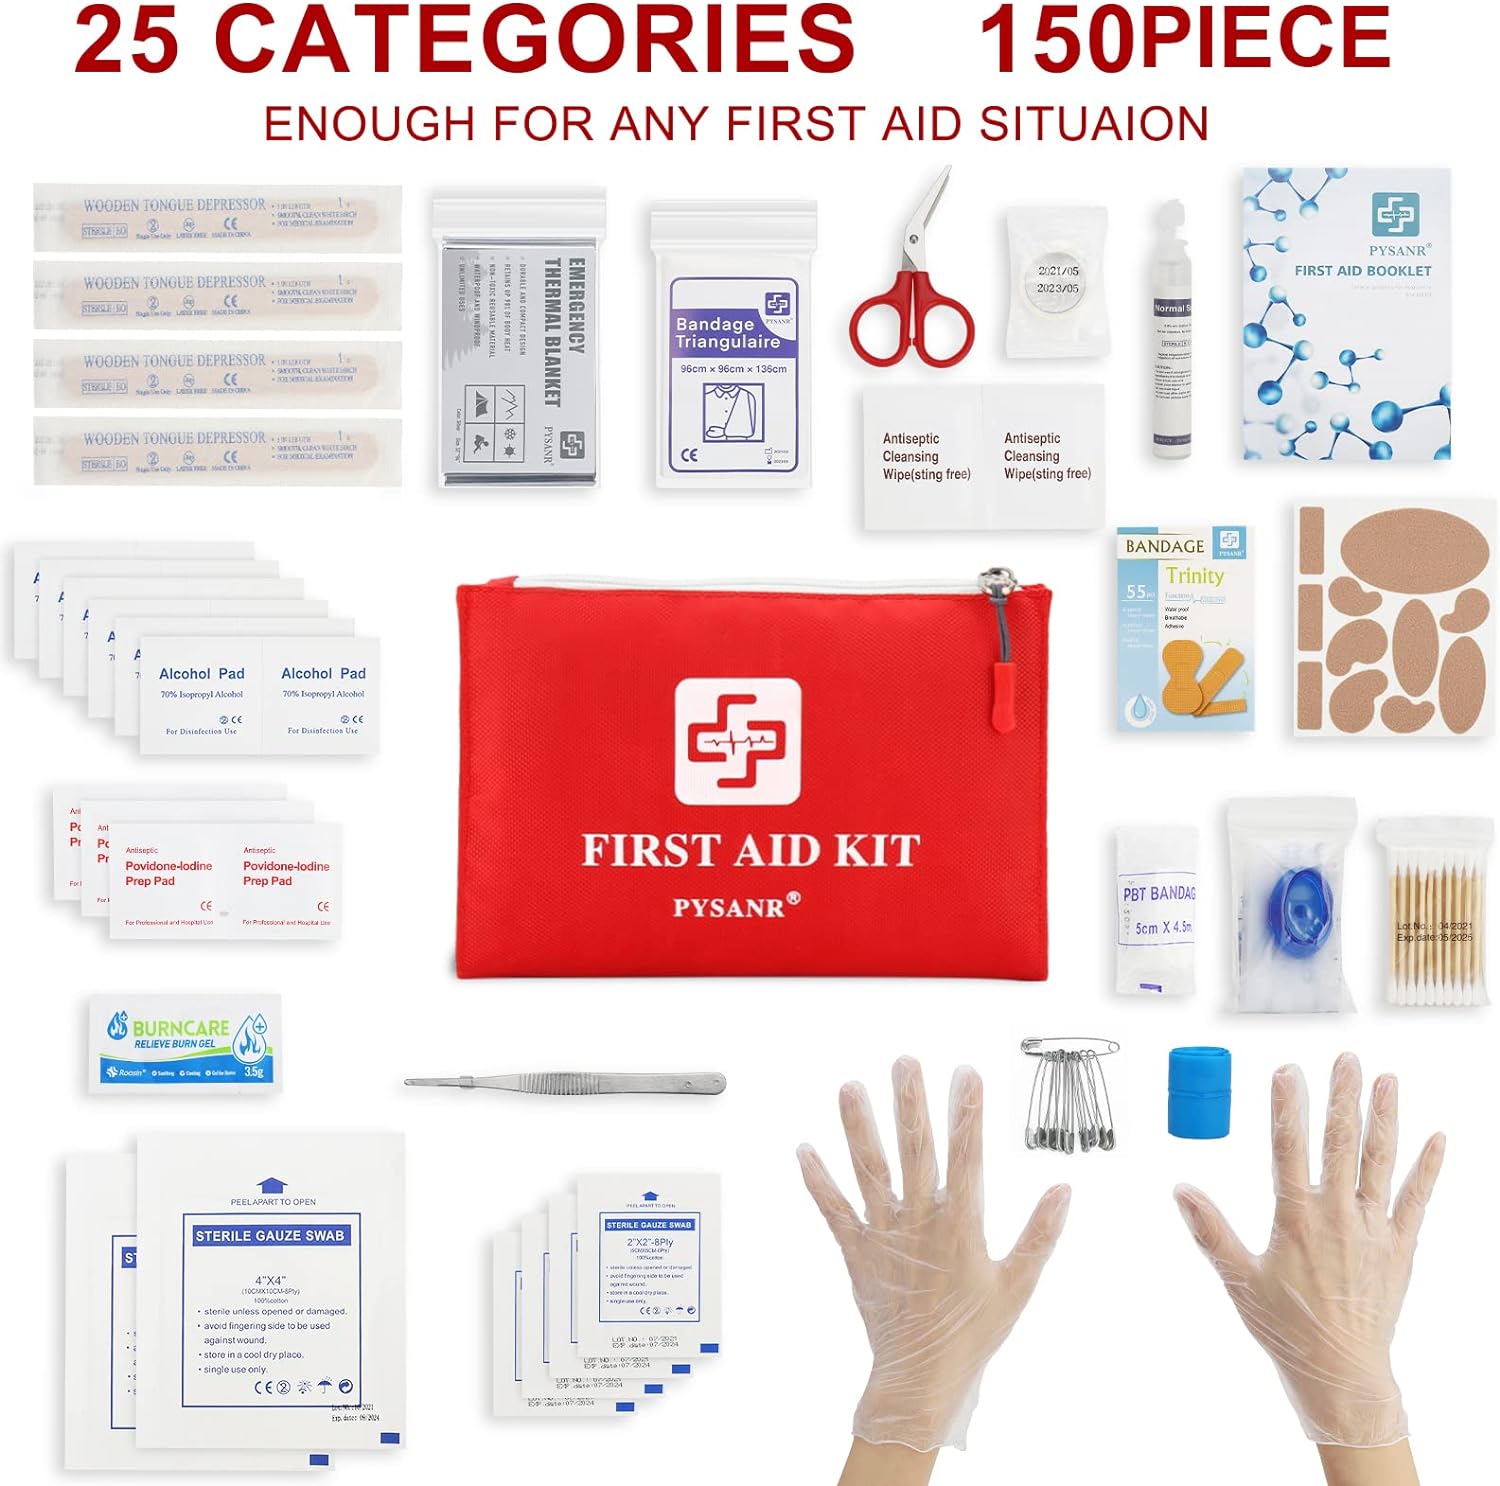 PYSANR Small First Aid Kit of 150 Piece